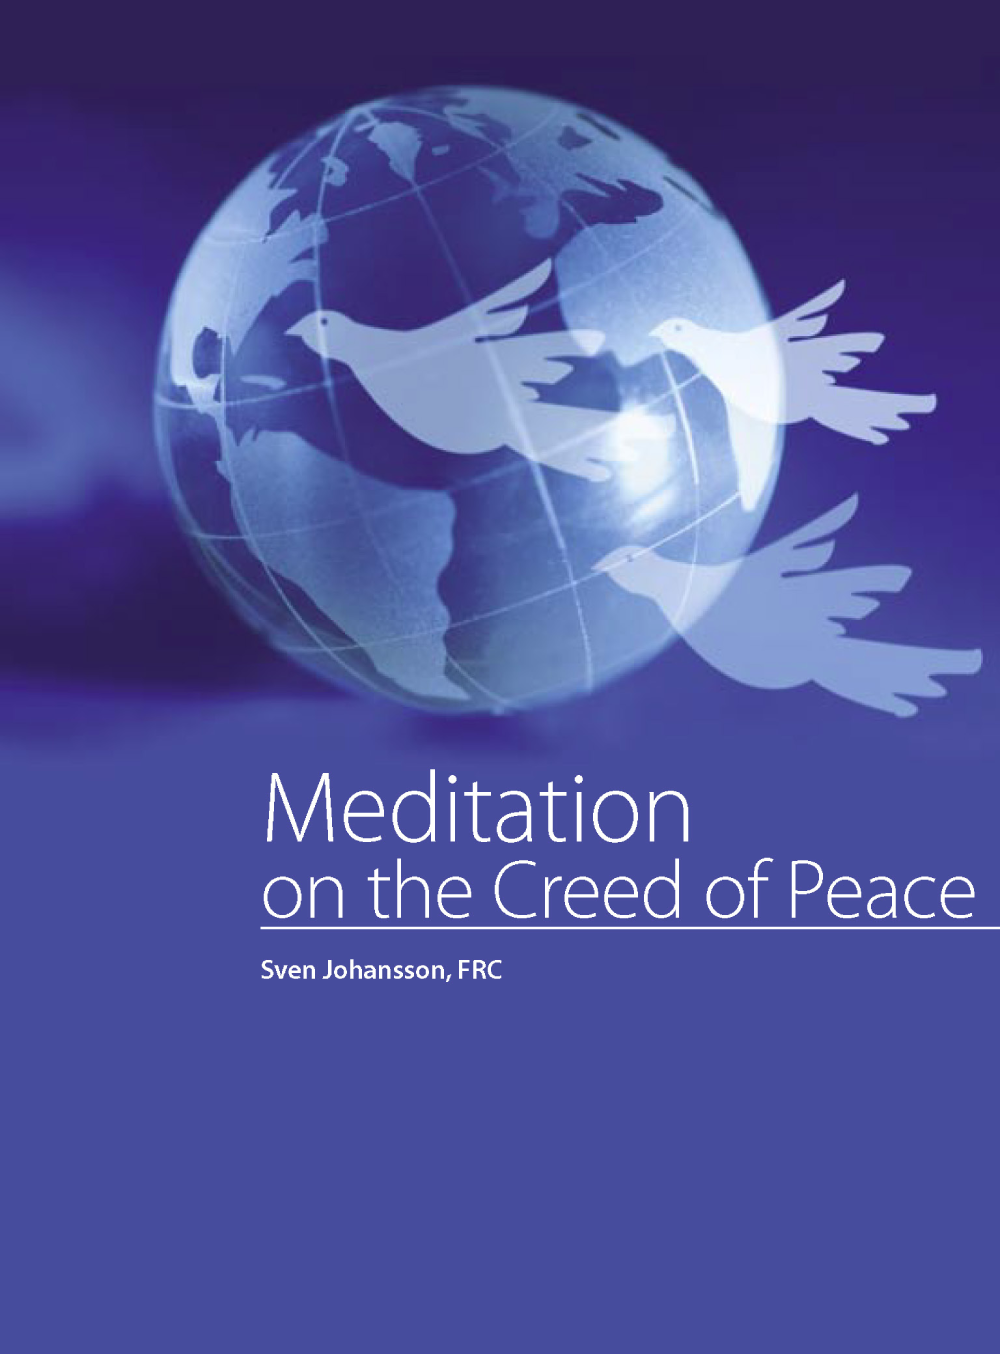 Meditation on the Creed of Peace